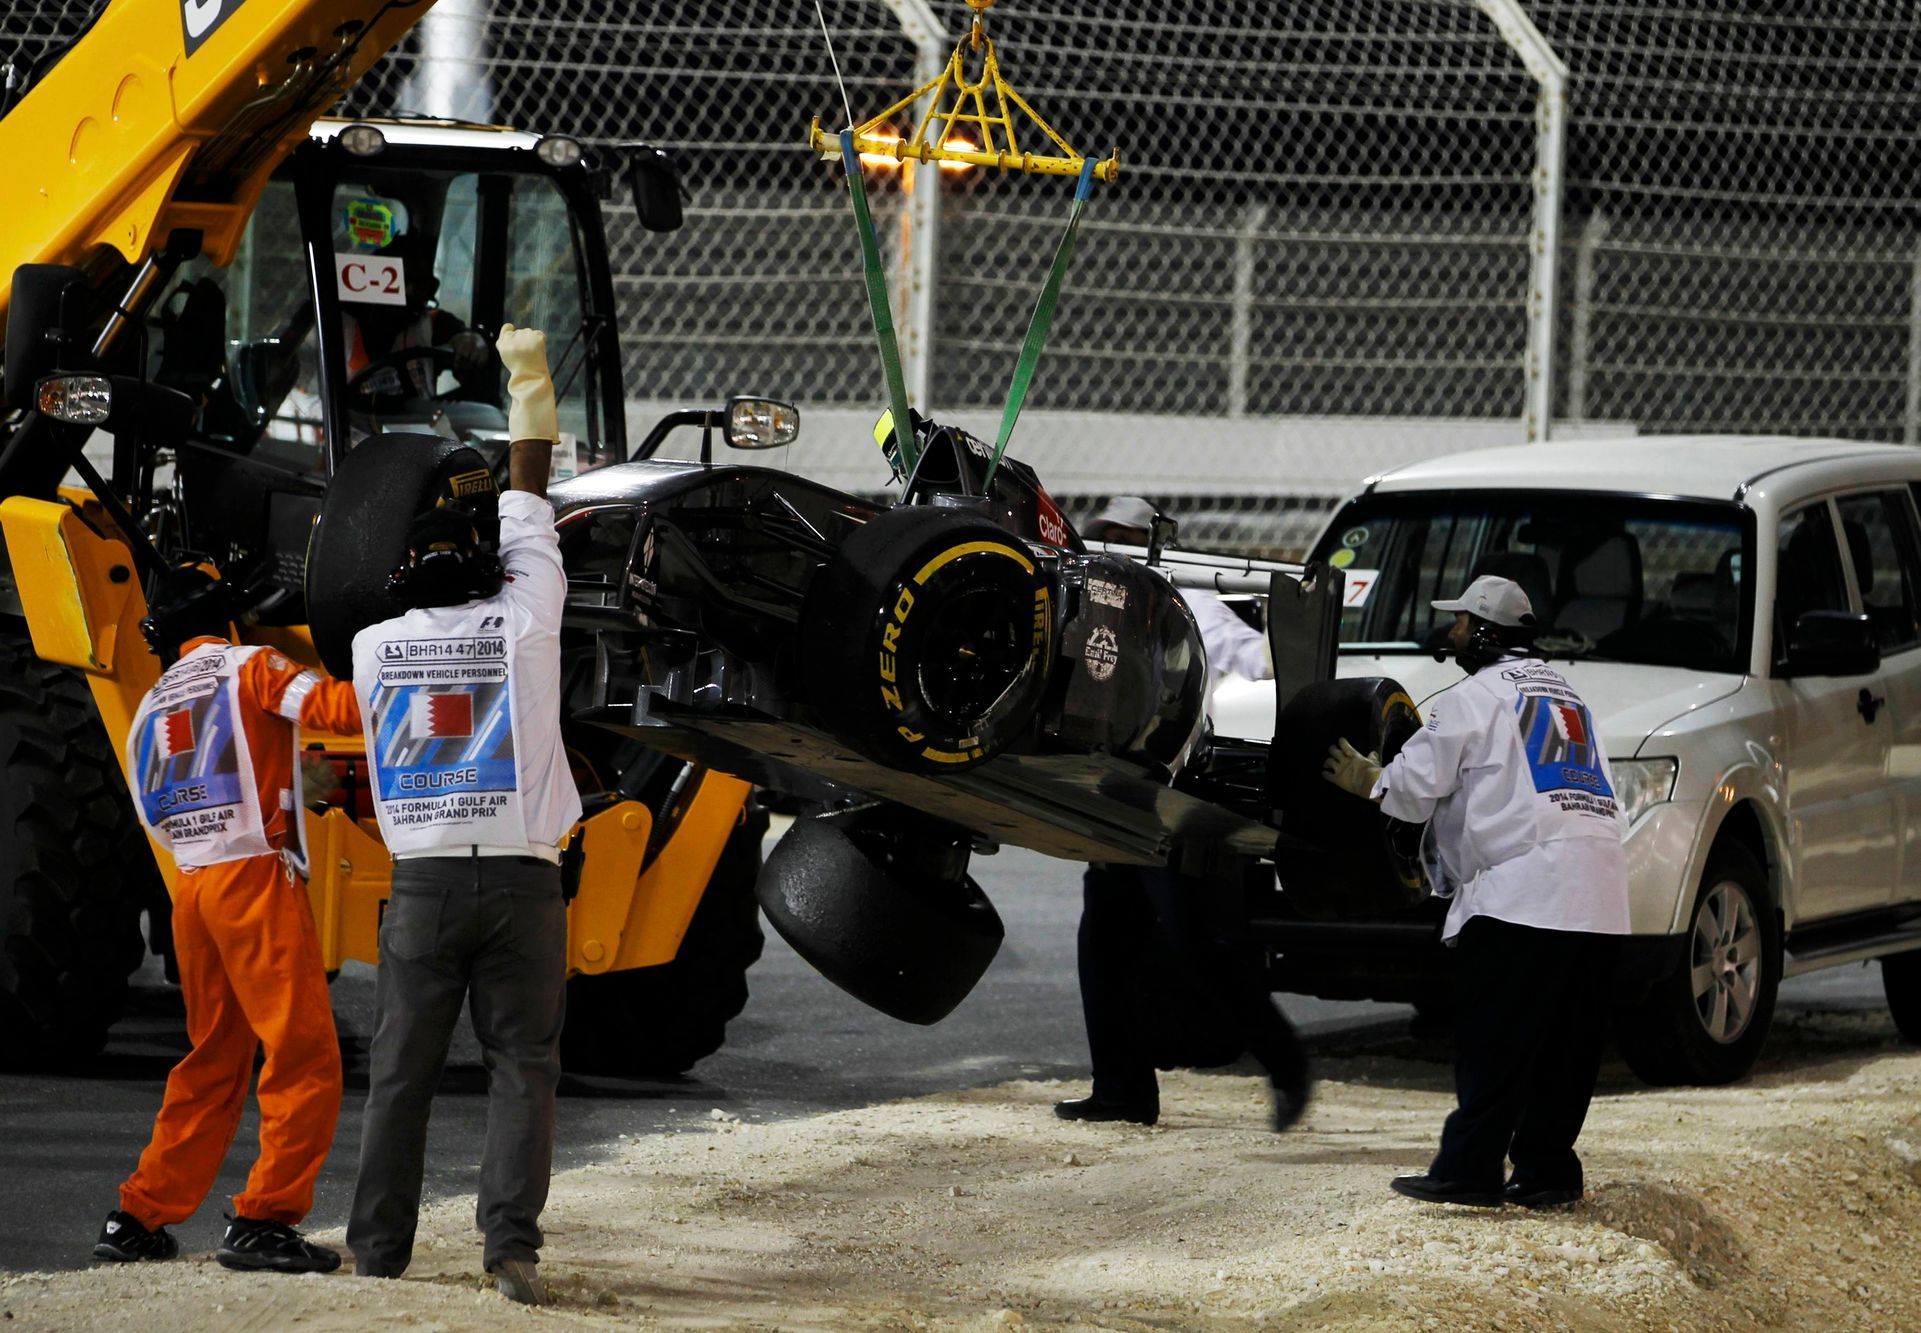 The car of Sauber Formula One driver Esteban Gutierrez of Mexico is removed from the track during the Bahrain F1 Grand Prix at the Bahrain International Circuit (BIC) in Sakhir